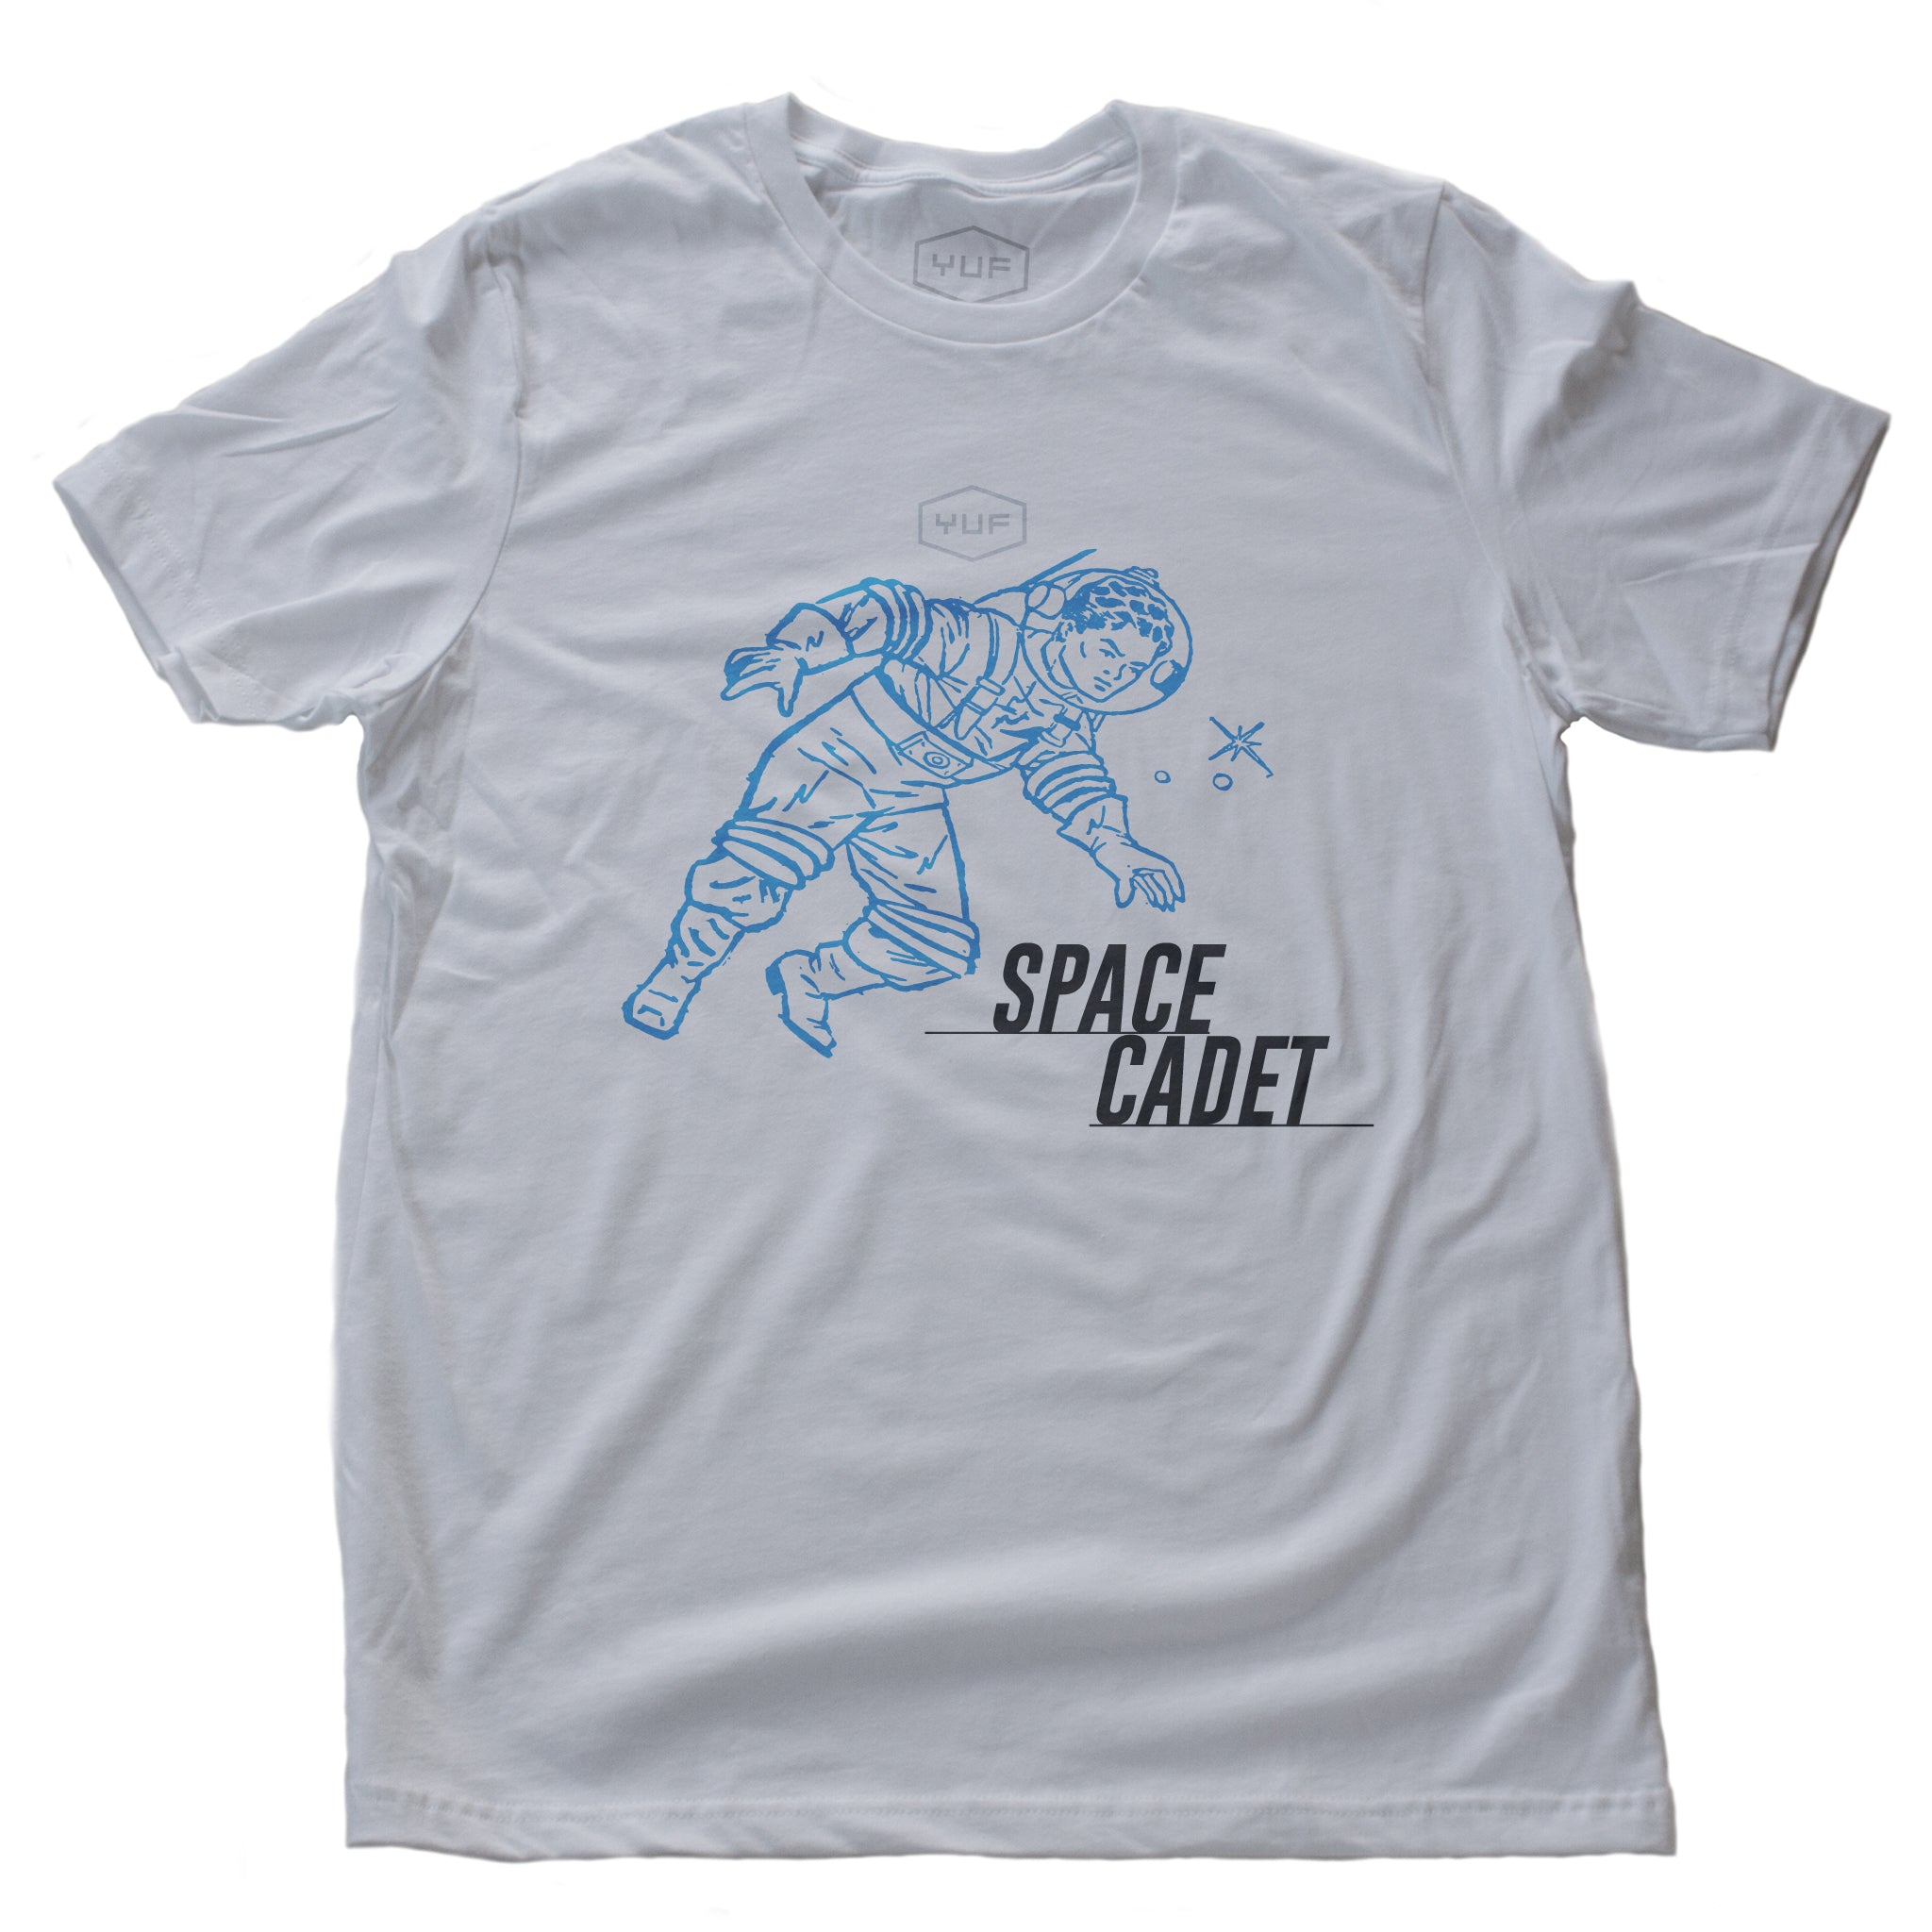 A sarcastic, self-deprecating vintage-inspired, retro design fashion t-shirt, featuring an astronaut or spaceman, amid stars, and the word “SPACE CADET.” By fashion brand YUF, for wolfsaint.net 